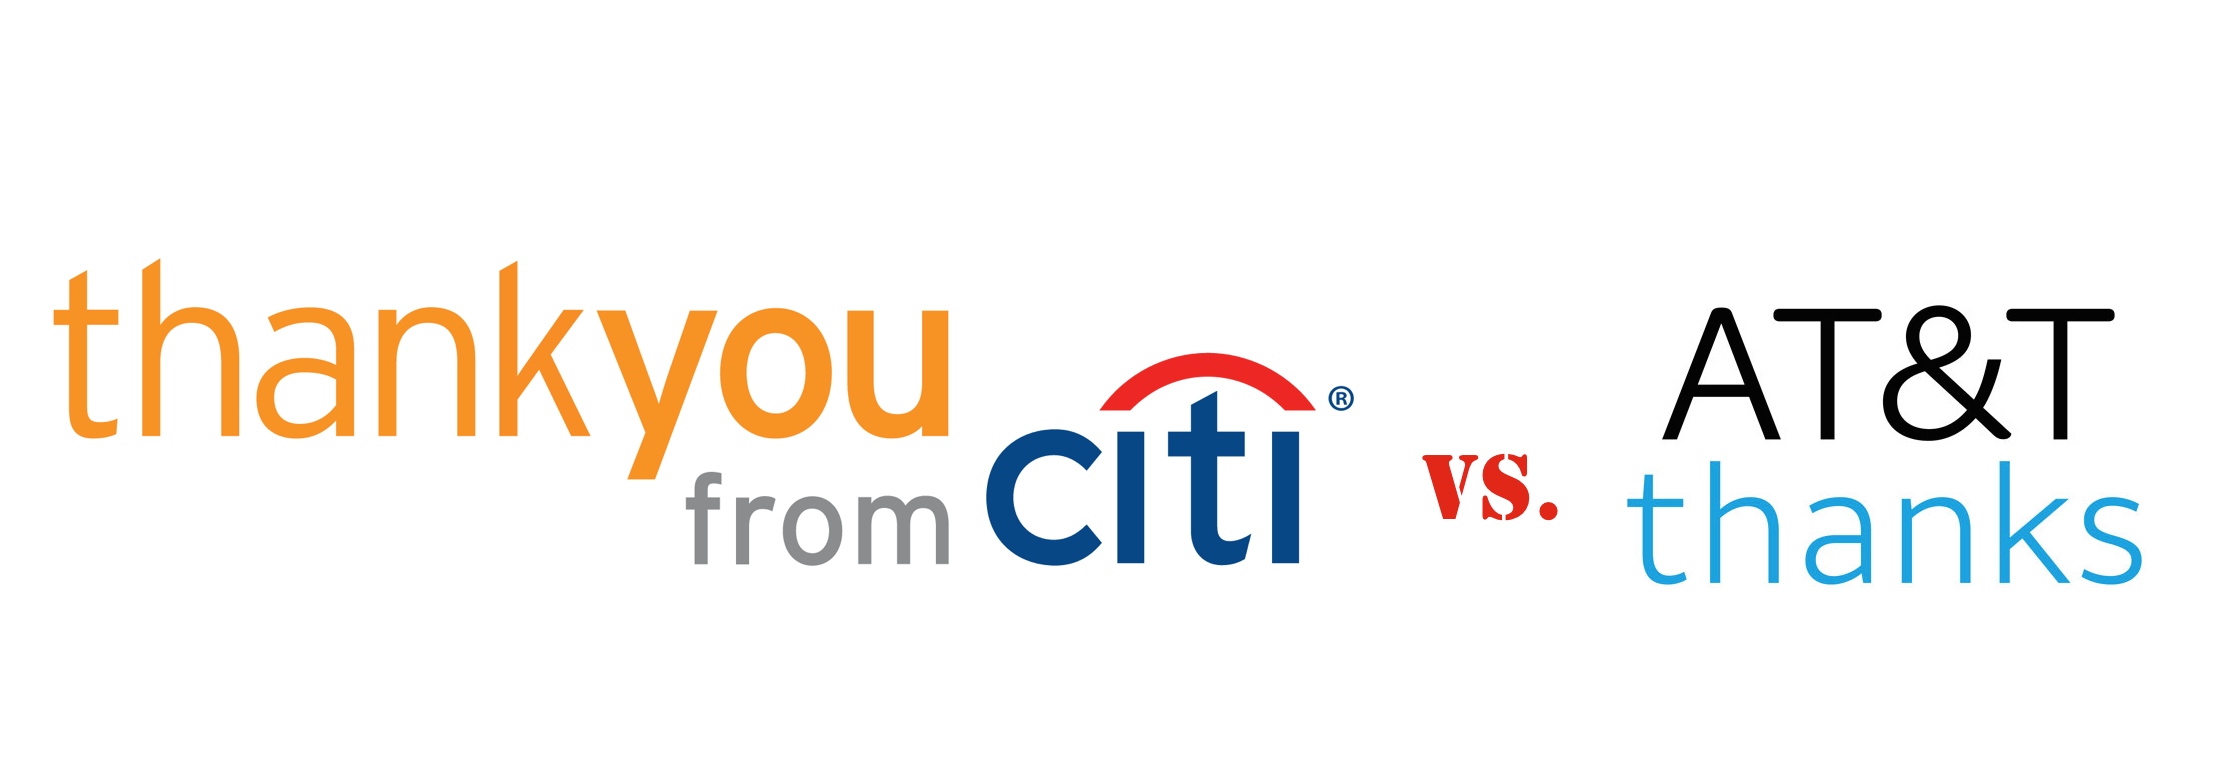 Citi Is Suing AT&T Over The Word “Thanks”